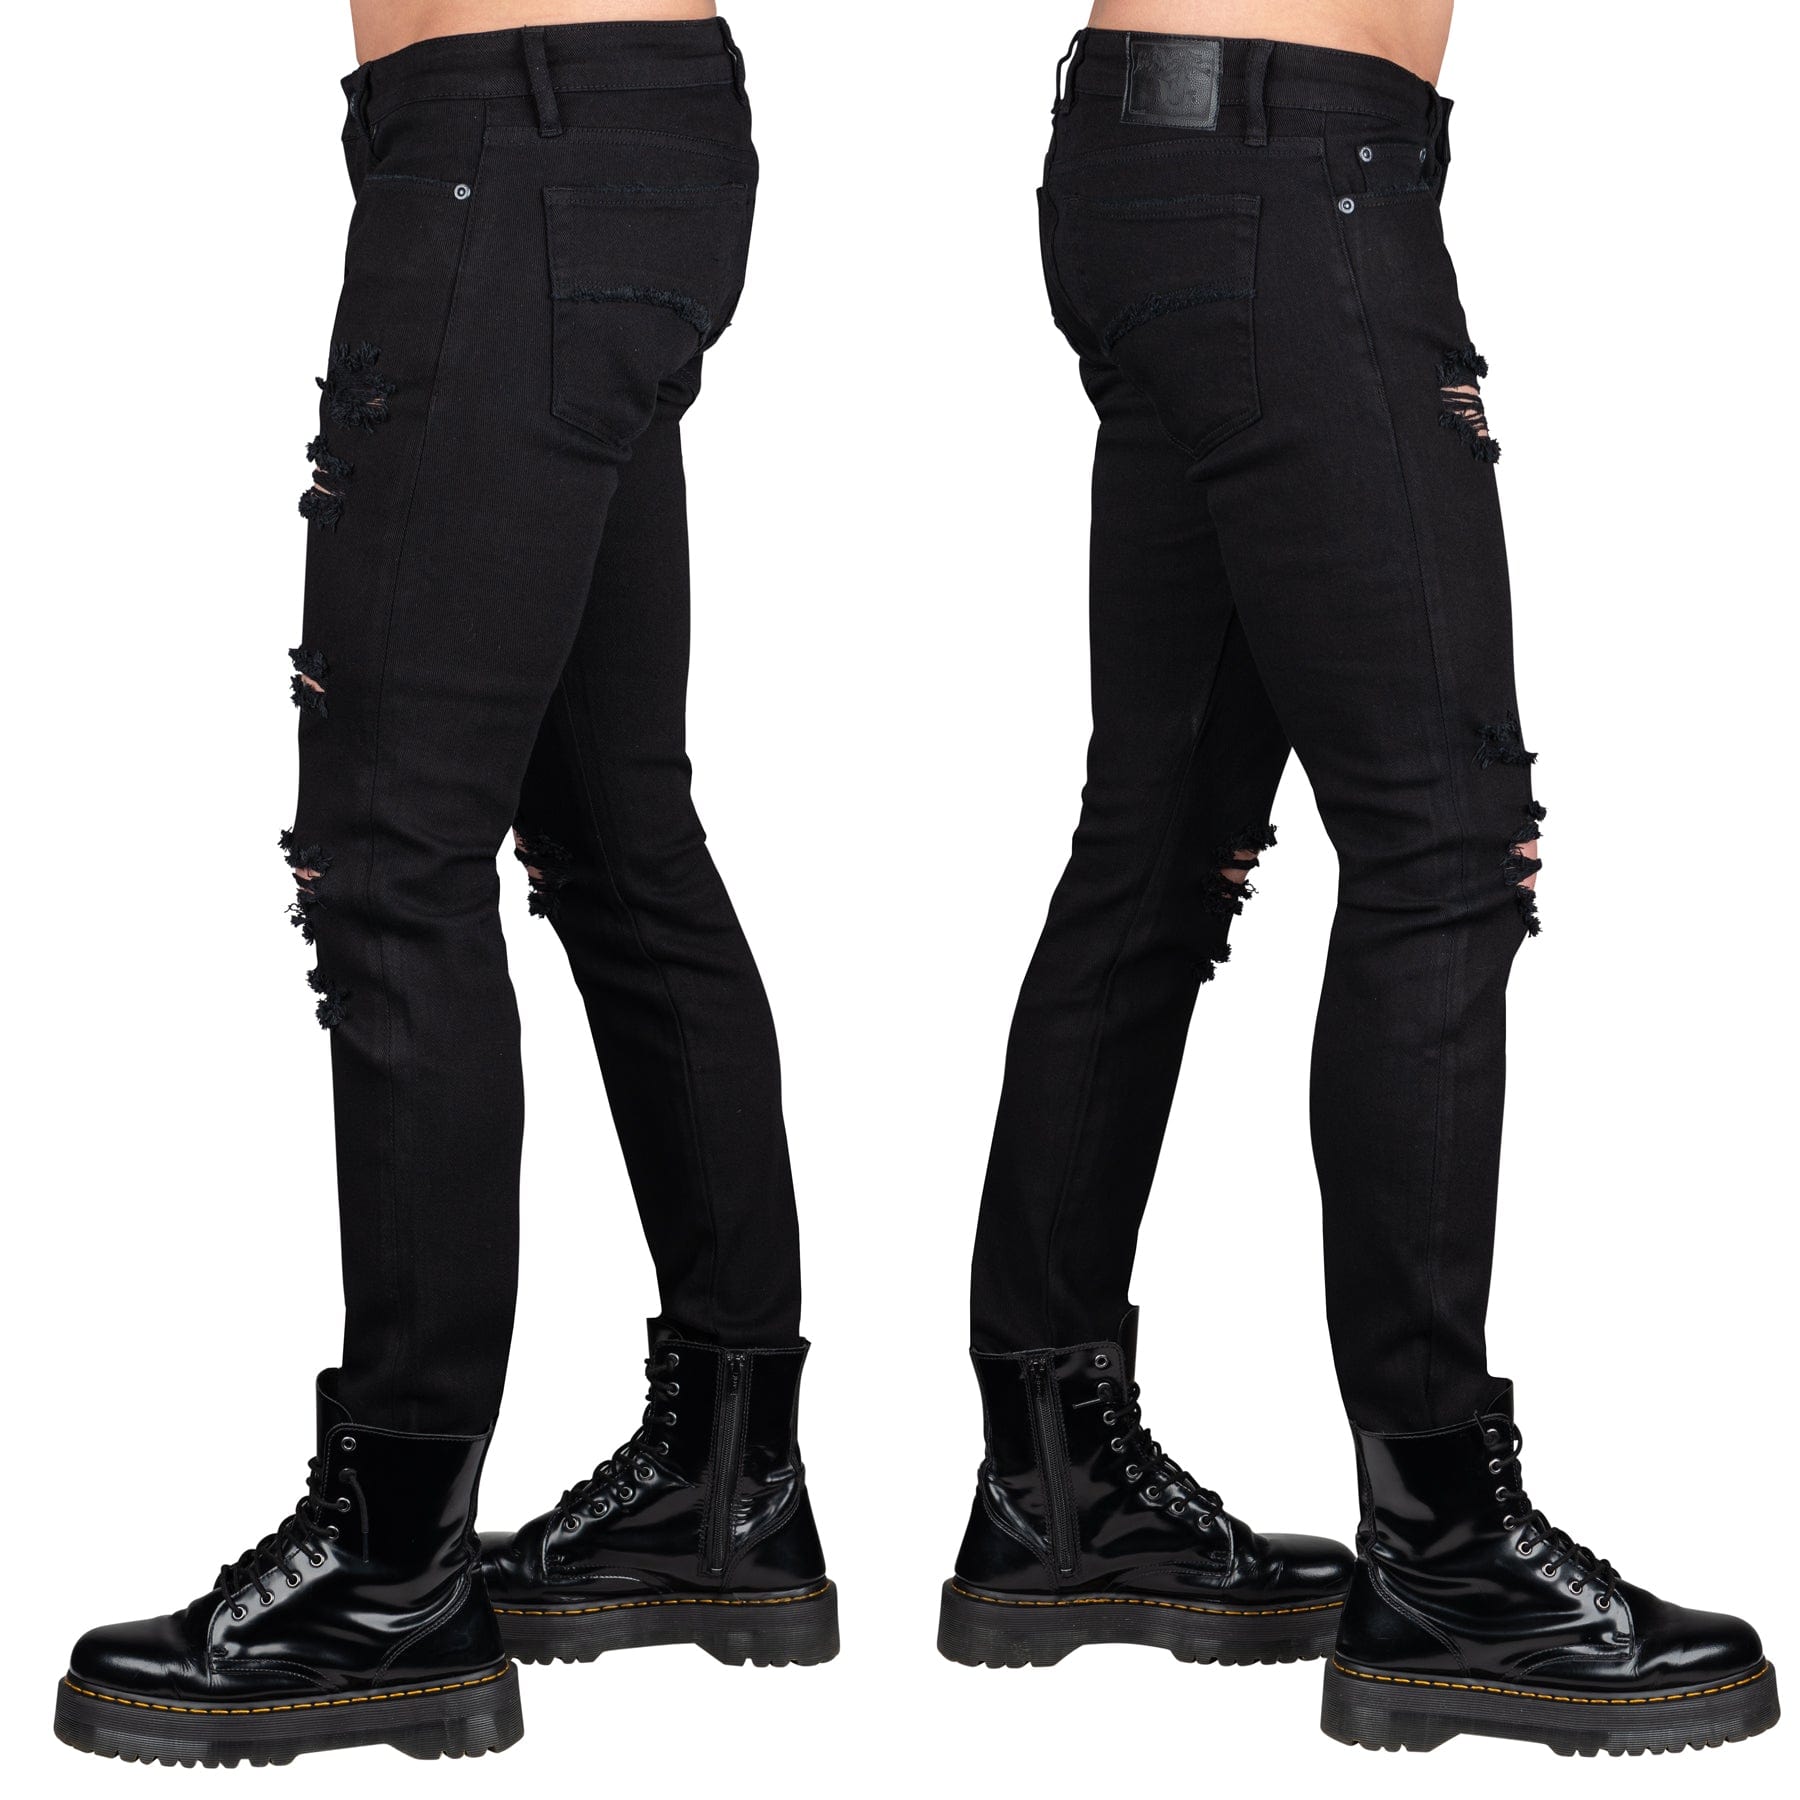 Essentials Collection Pants Rampager Shredded Jeans - Black